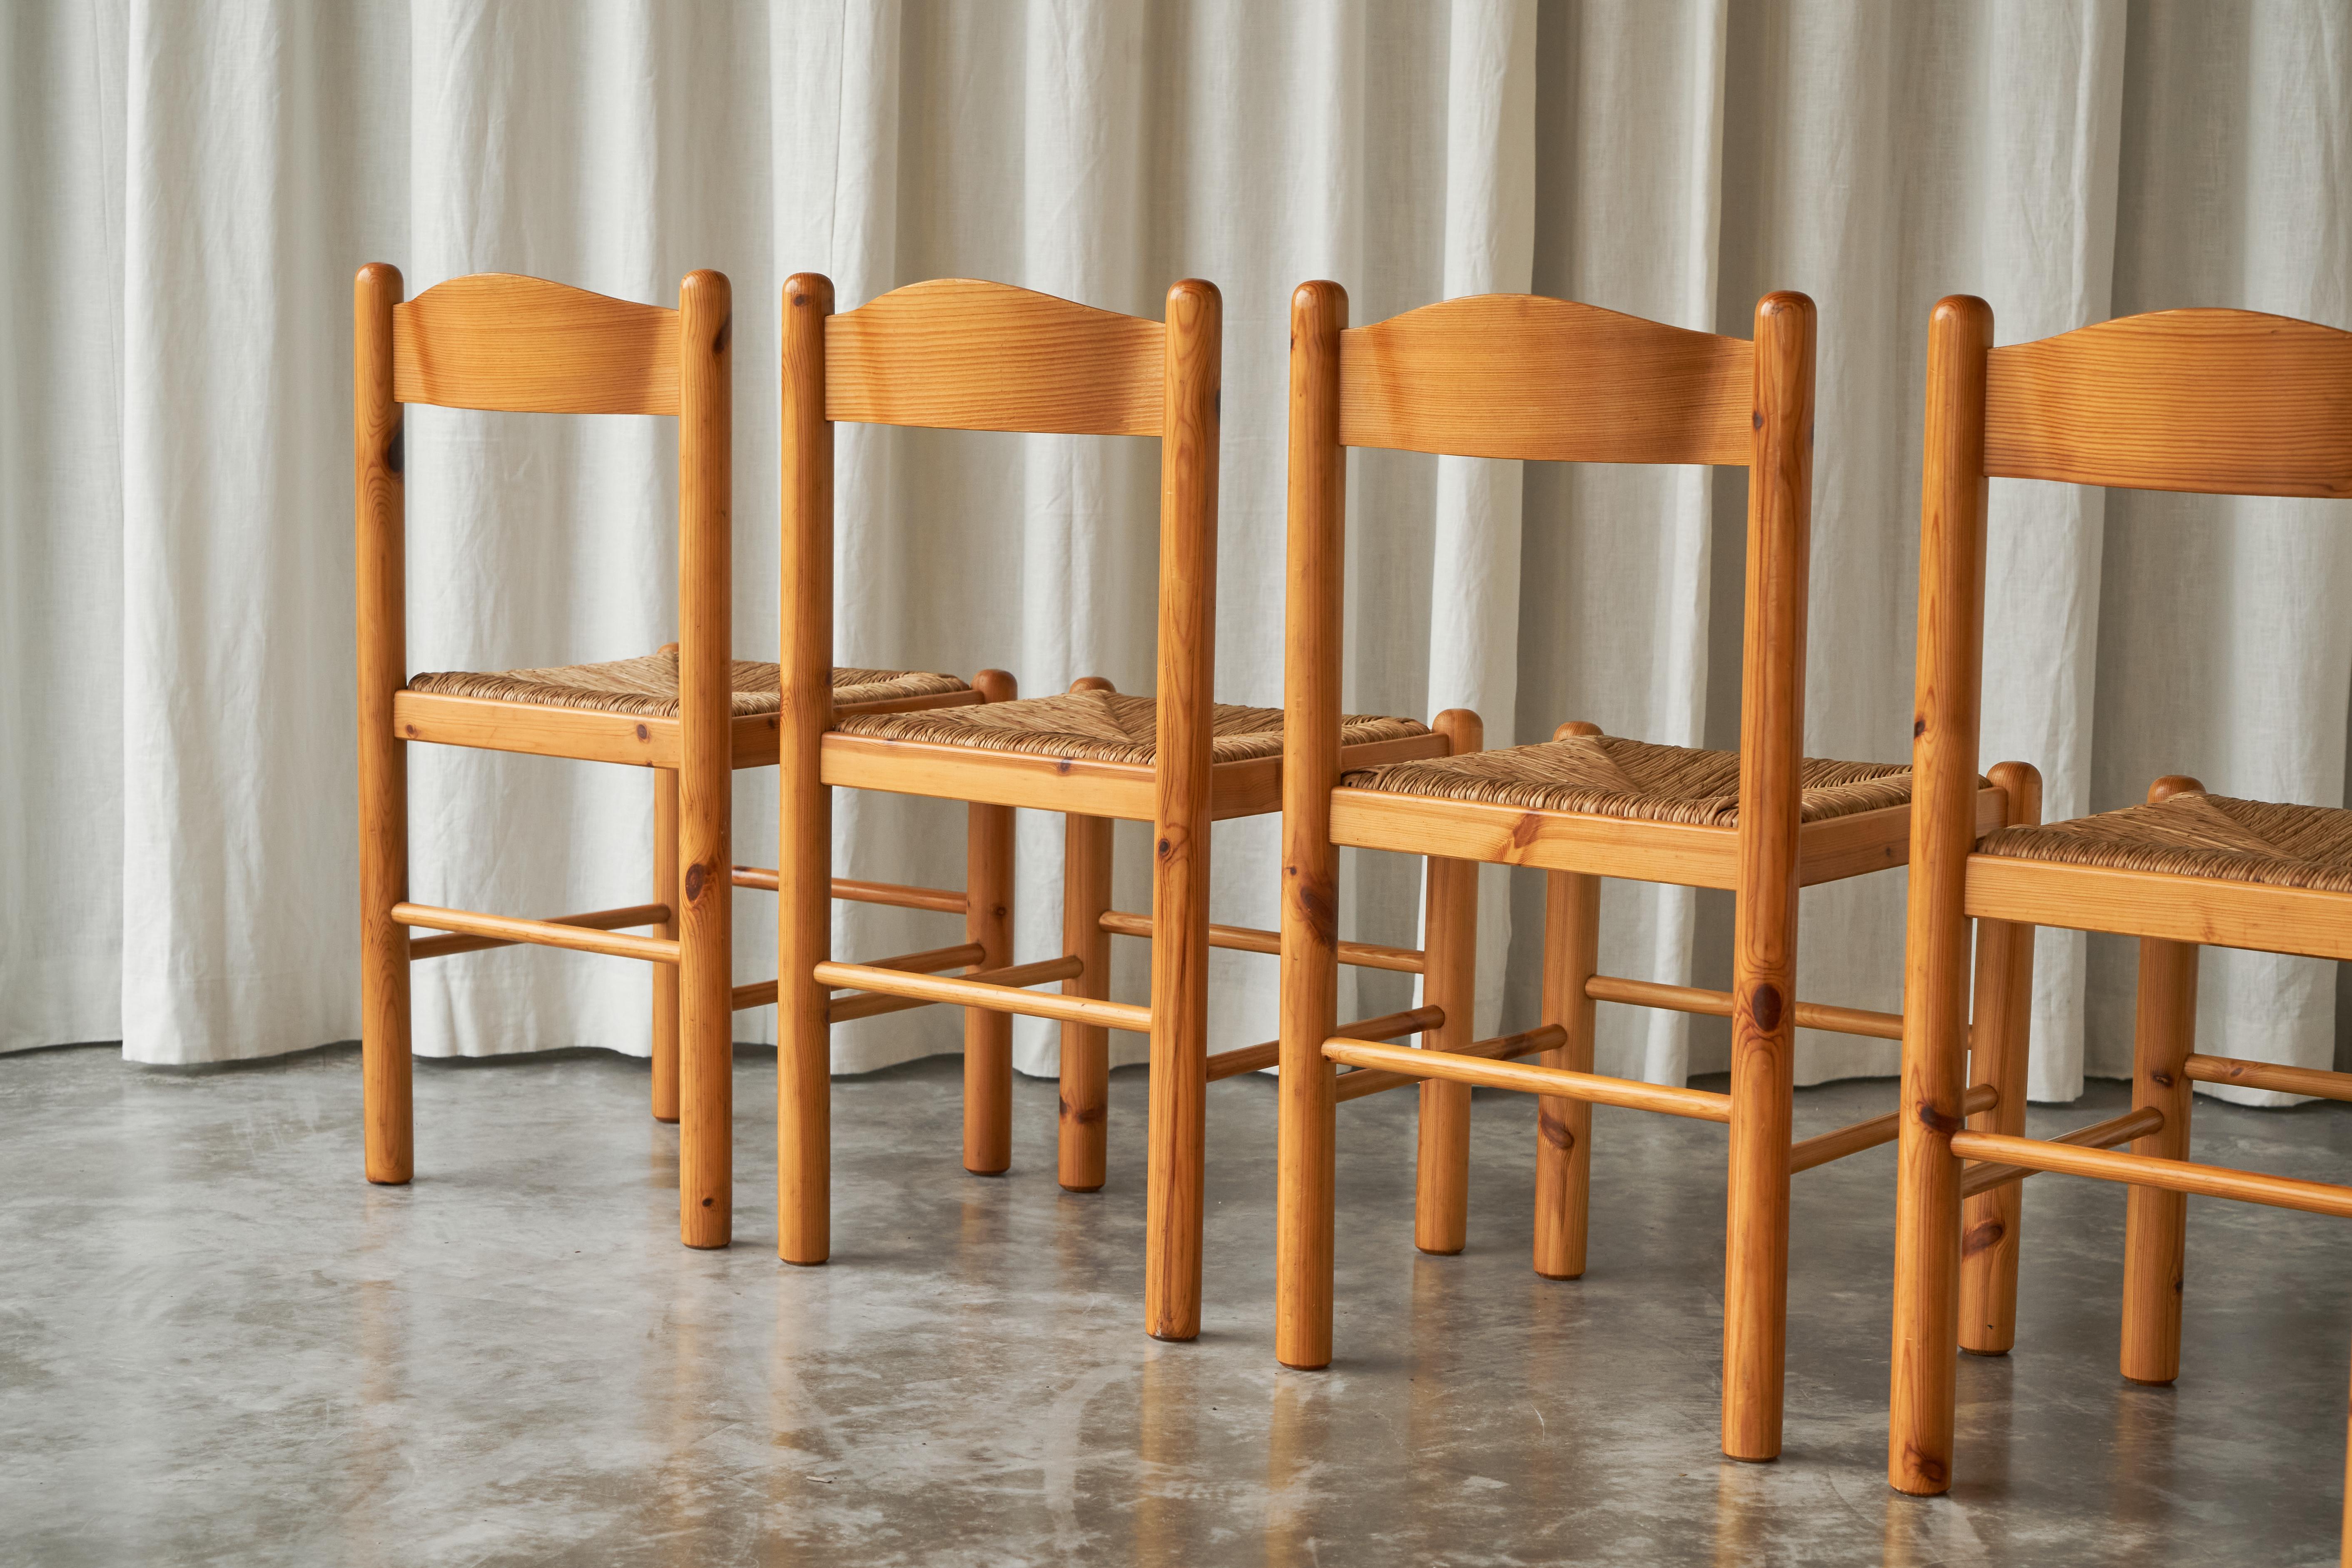 Set of 6 Rustic Chalet Chic Chairs in Pine and Rush 1960s For Sale 1